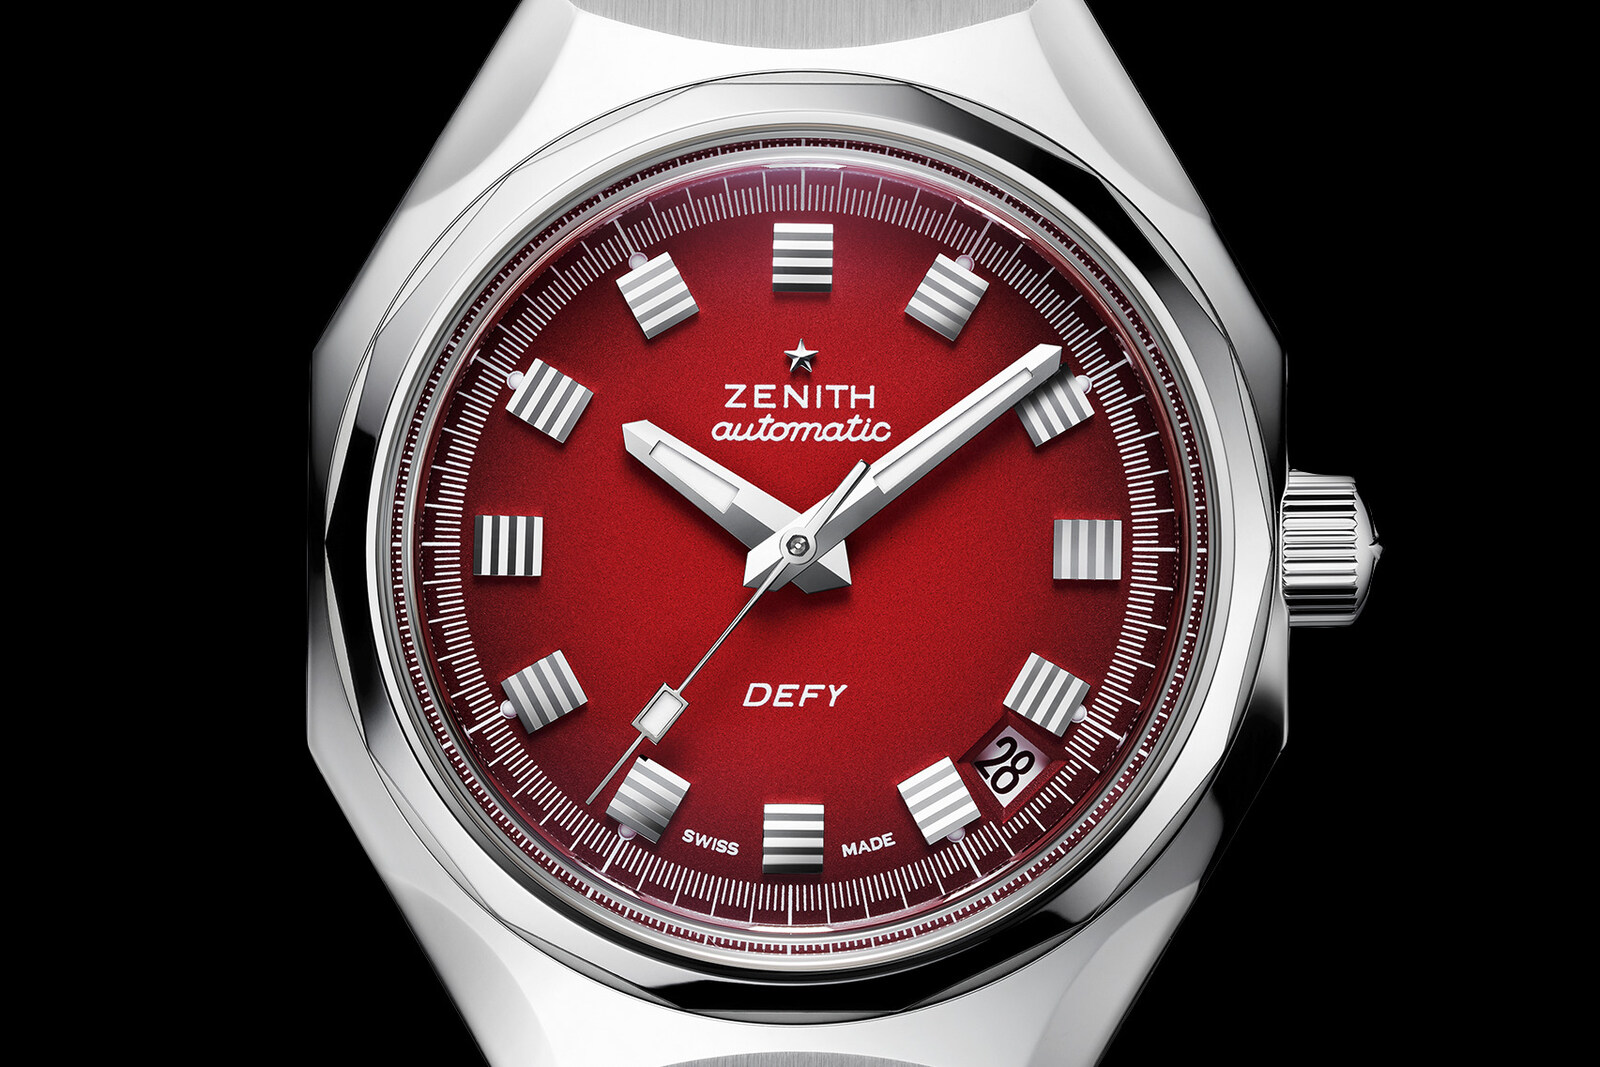 The Zenith Defy Revival A3691 Relives The 1970s, But With Upgrades